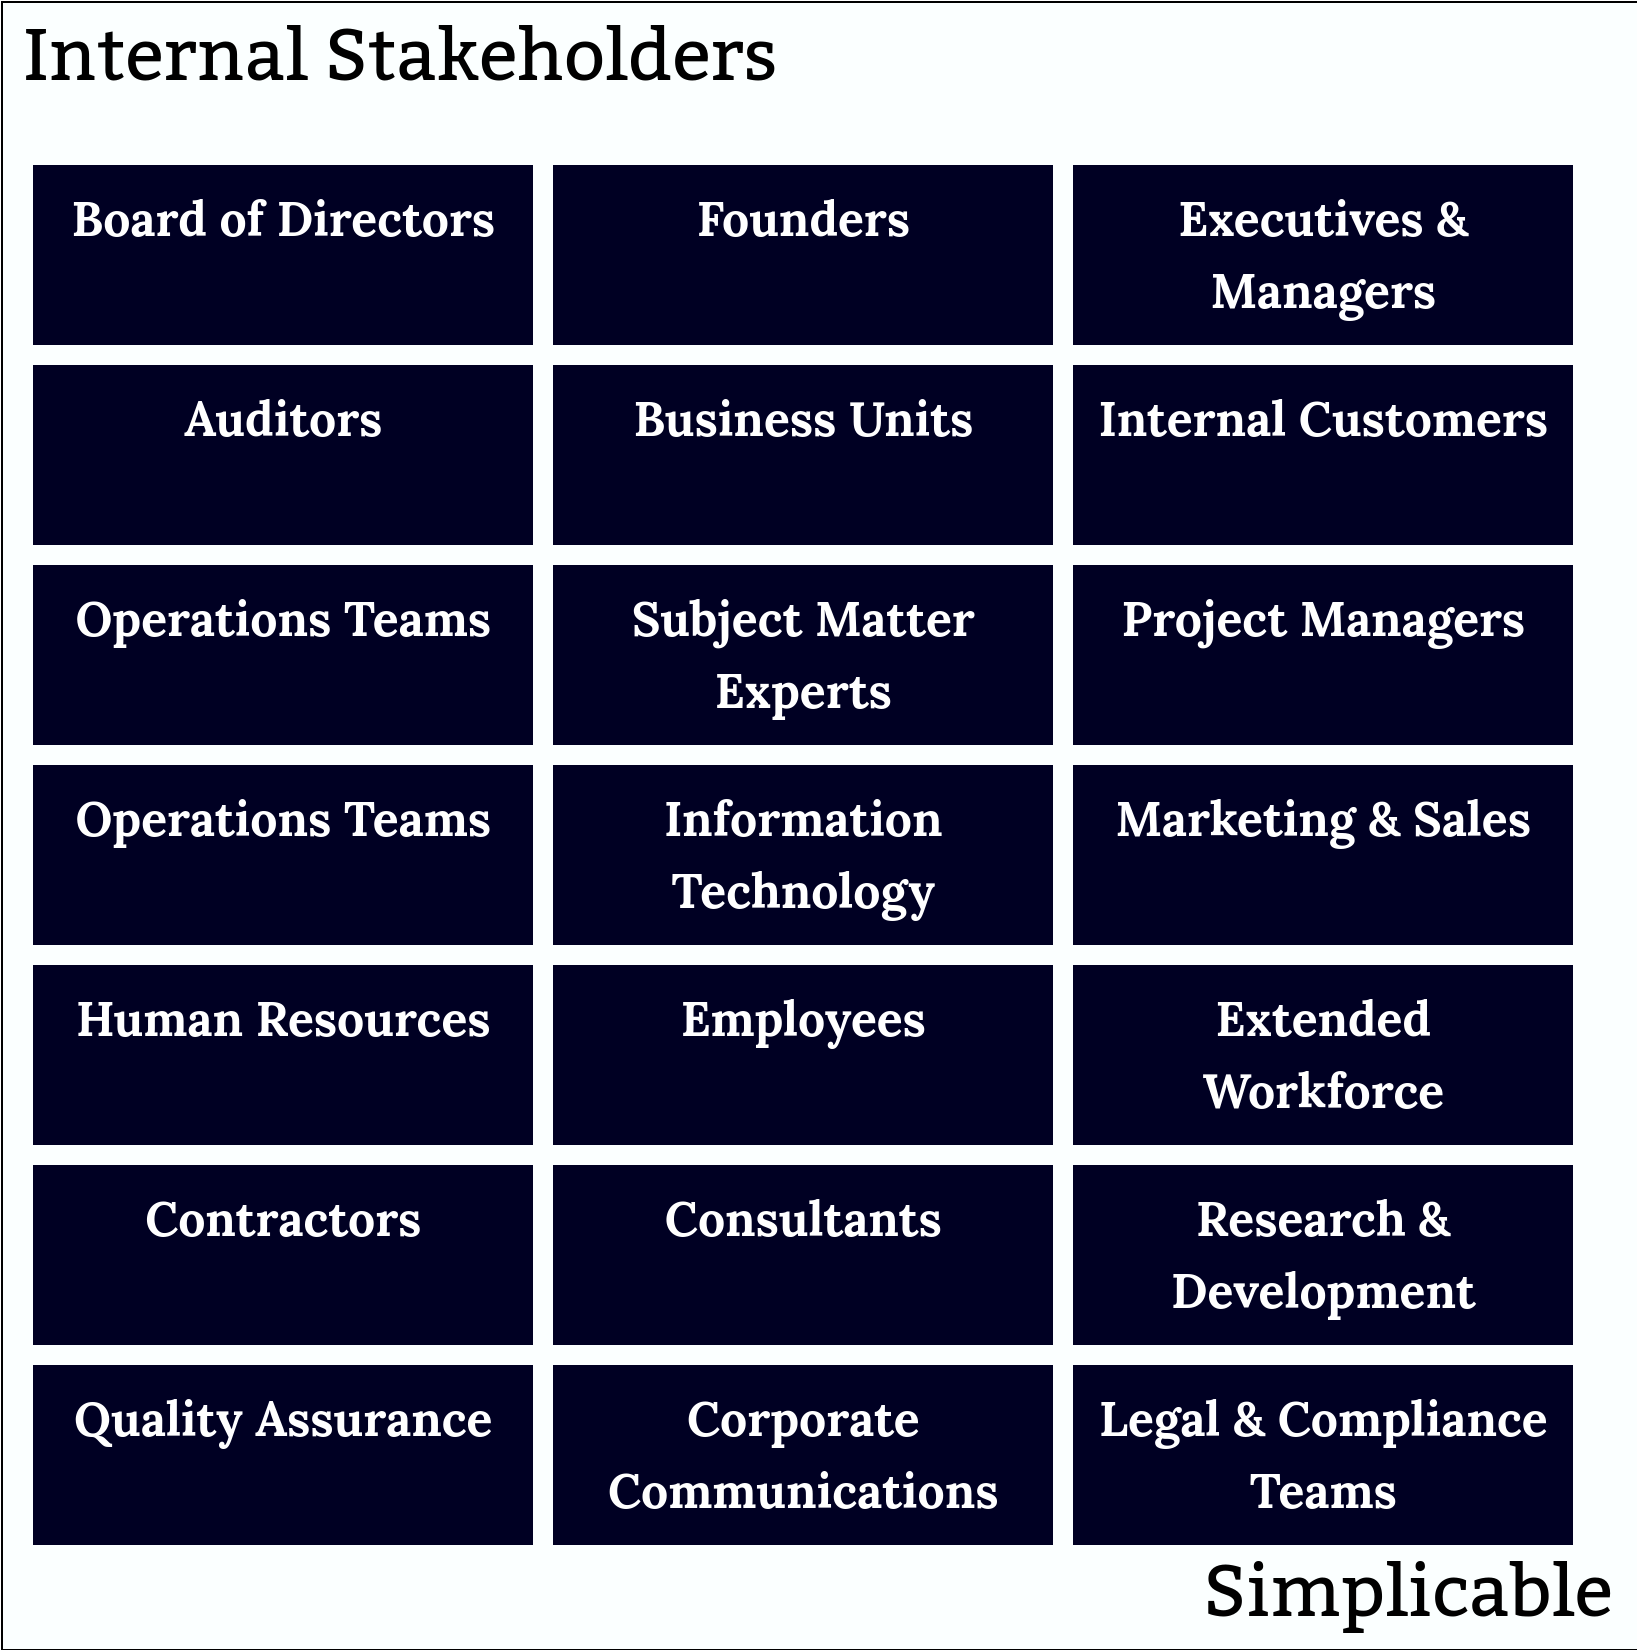 internal stakeholders simplicable